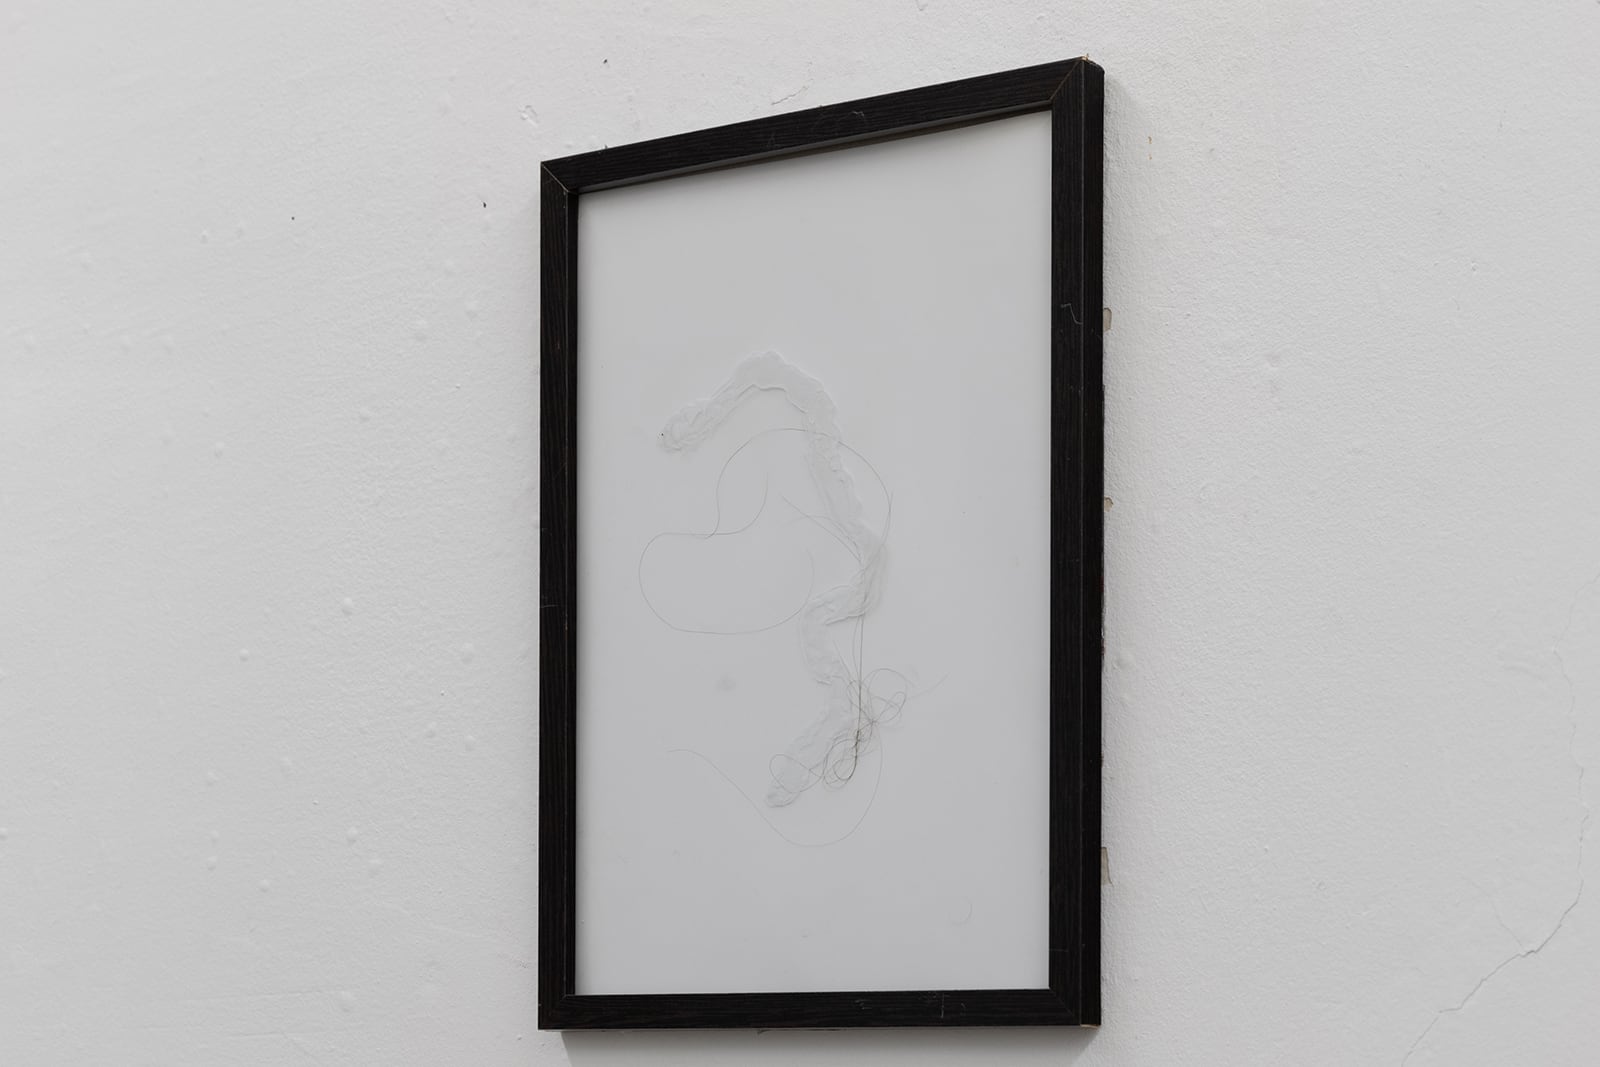 Vadim Murin, Untitled, 2019, artist frame with glass, silicone, male hair, 21 x 29 cm